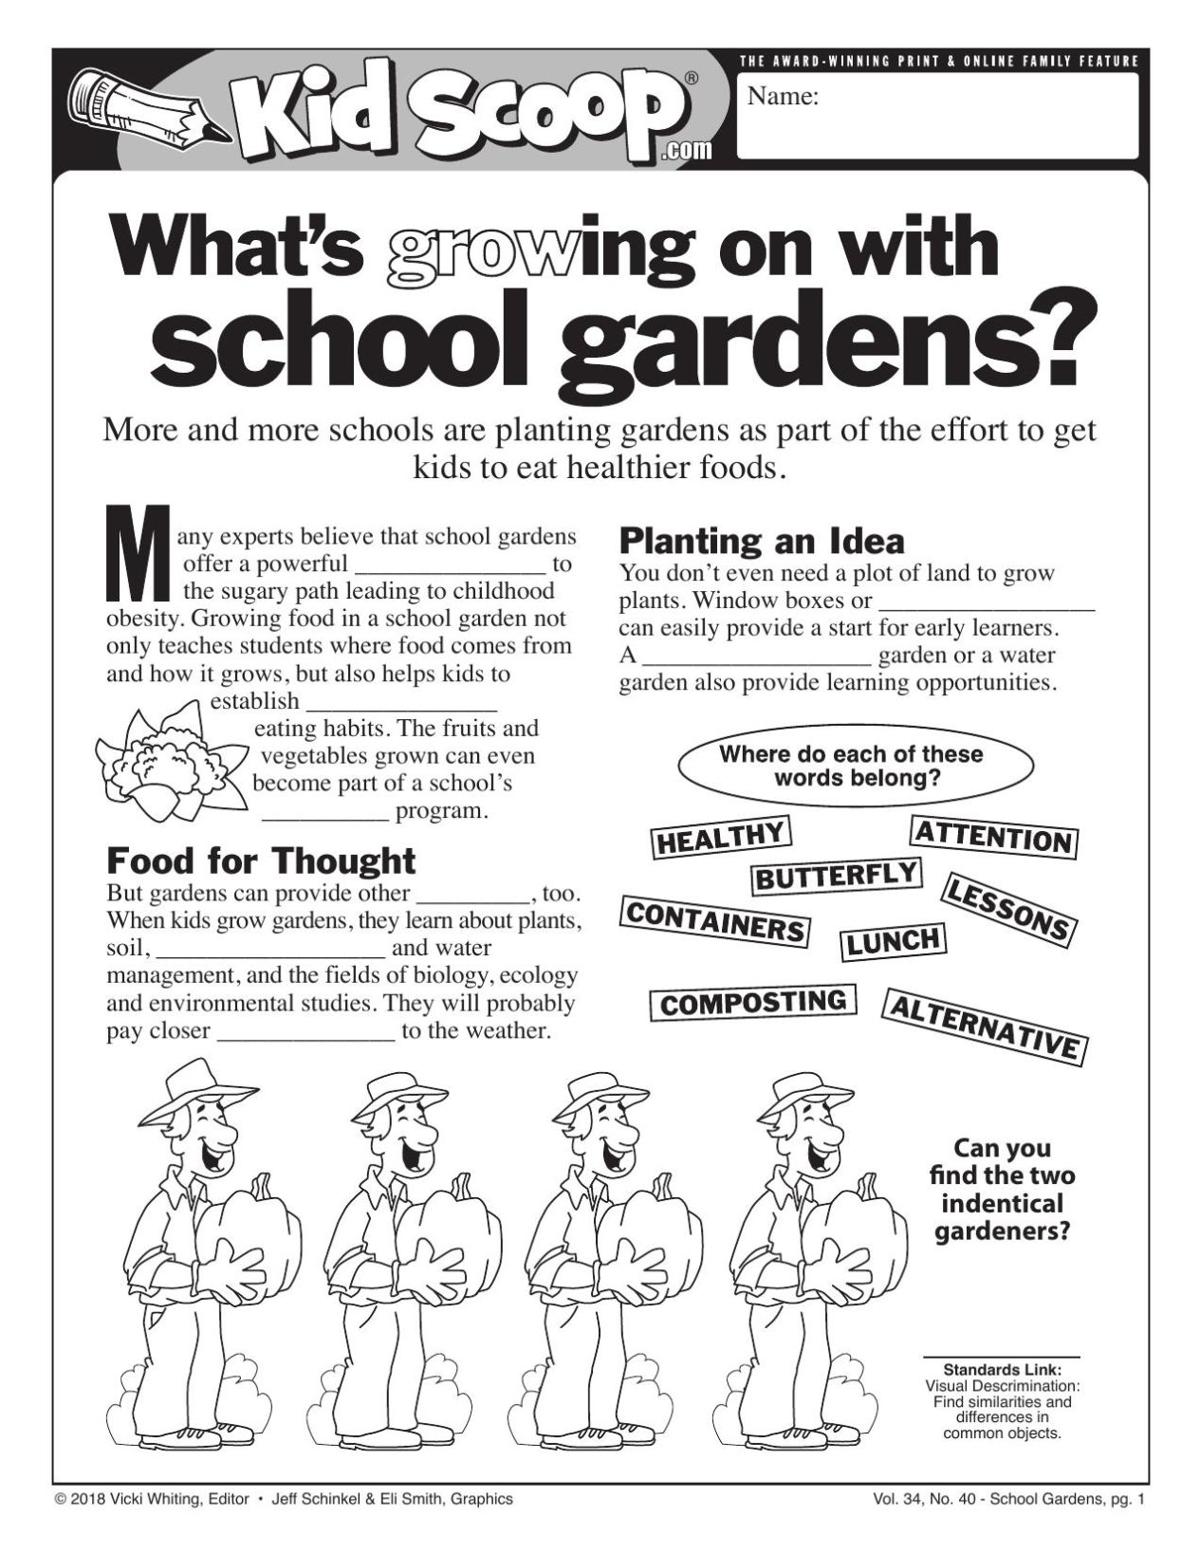 What's growing on with school gardens?